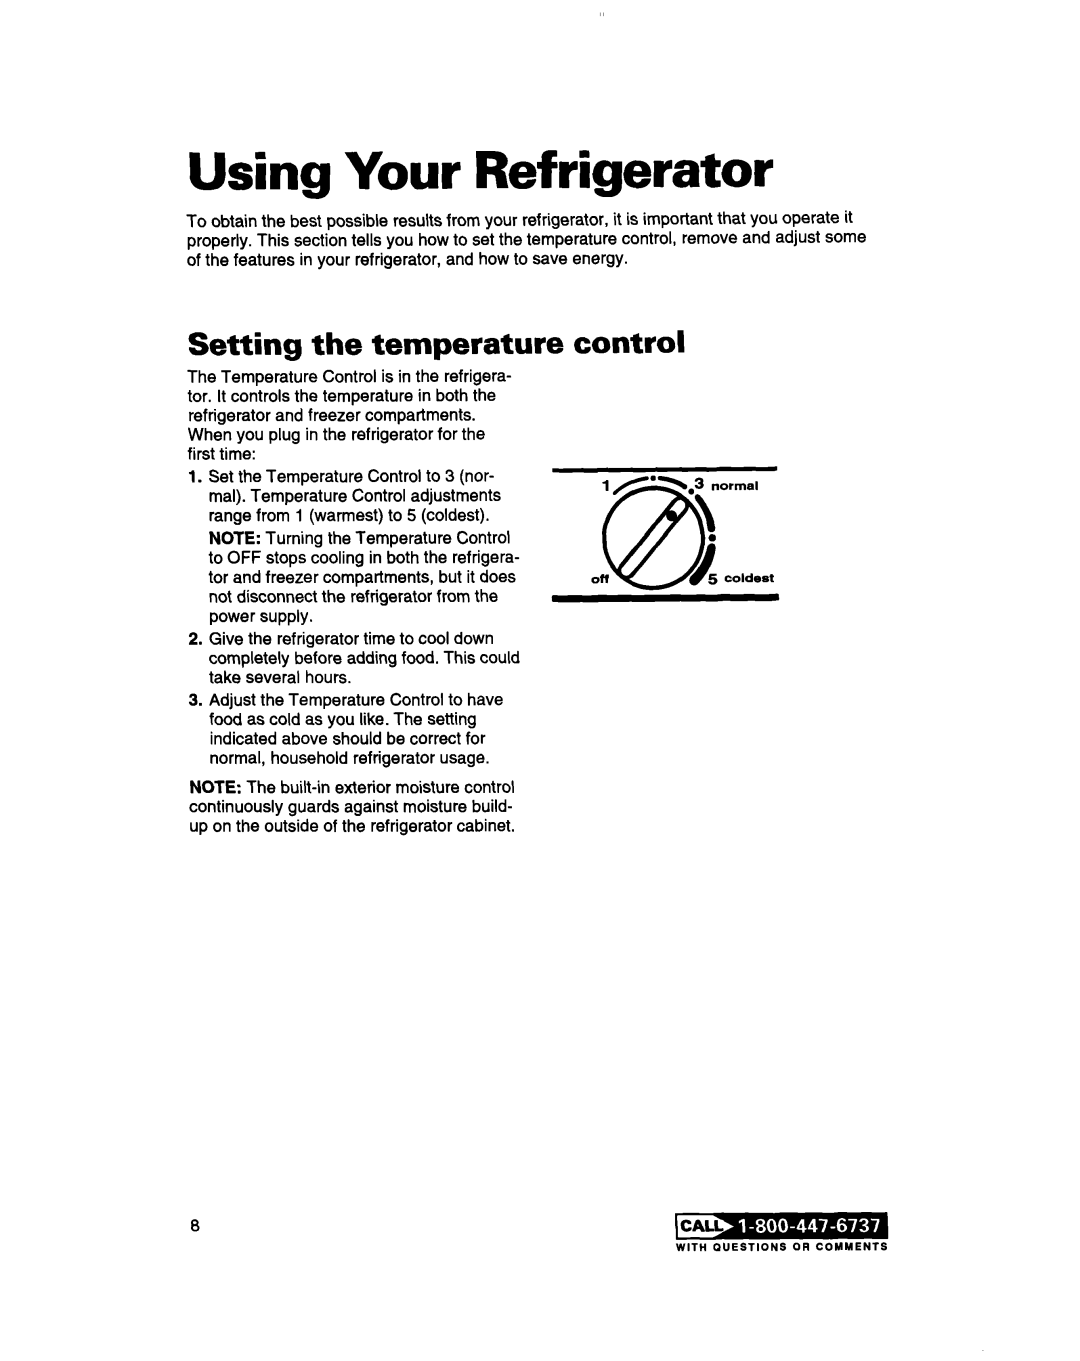 Whirlpool 2183013 warranty Using Your Refrigerator, Setting the temperature control 